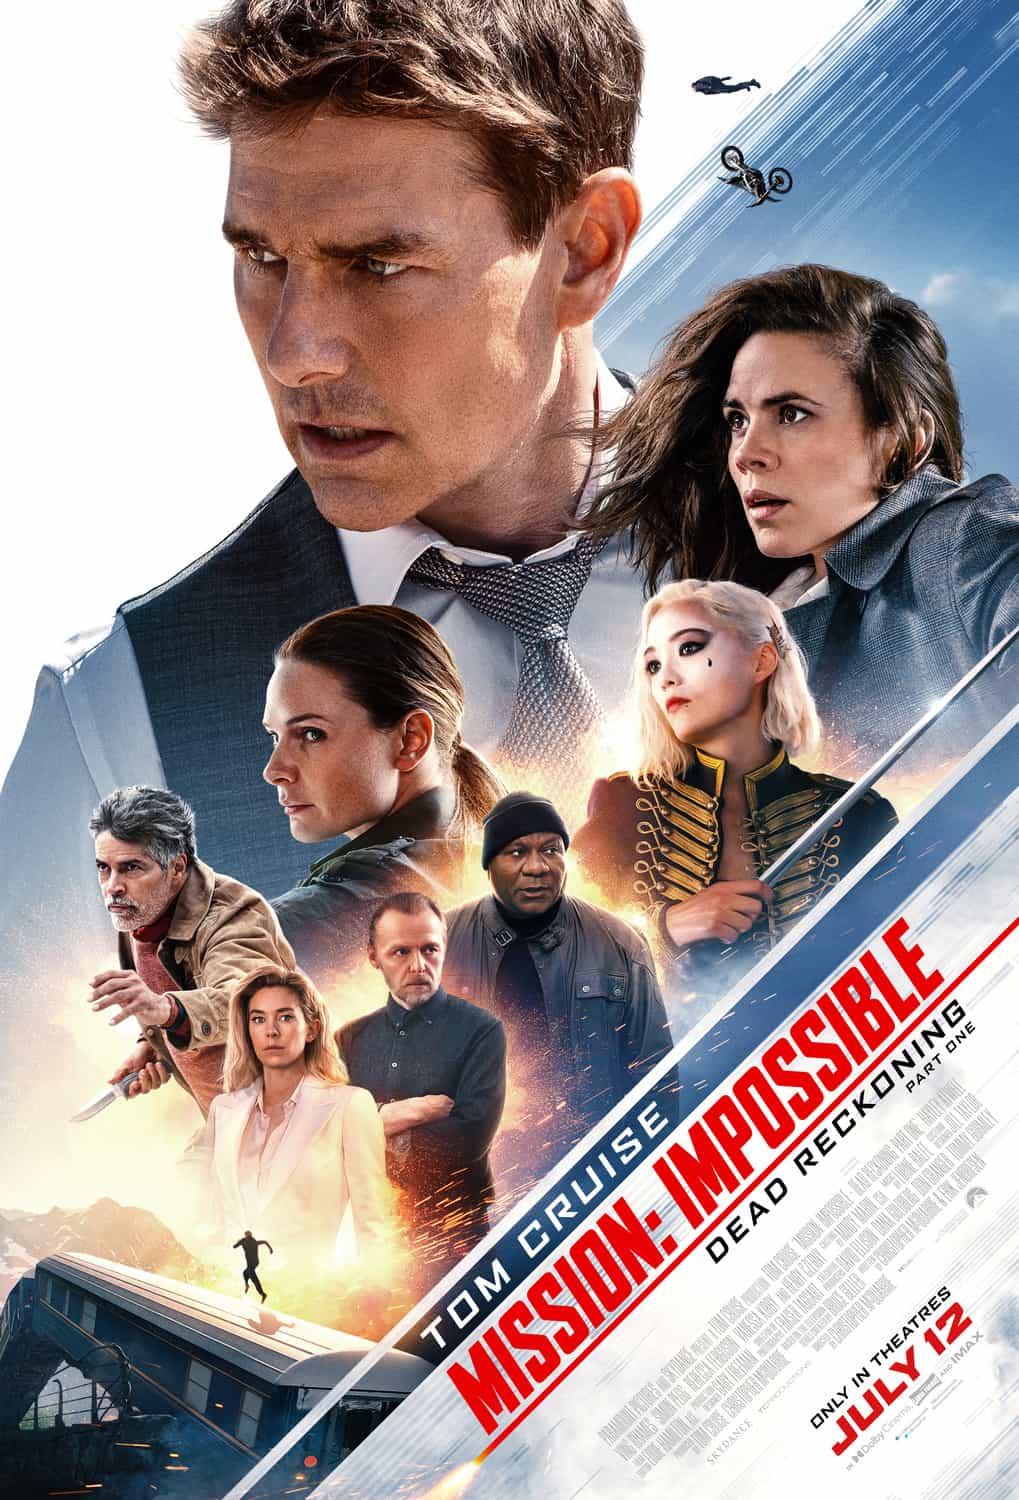 New poster has been released for Mission:Impossible - Dead Reckoning Part 1 which stars Tom Cruise and Indira Varma - movie UK release date 14th July 2023 #missionimpossibledeadreckoningpart1